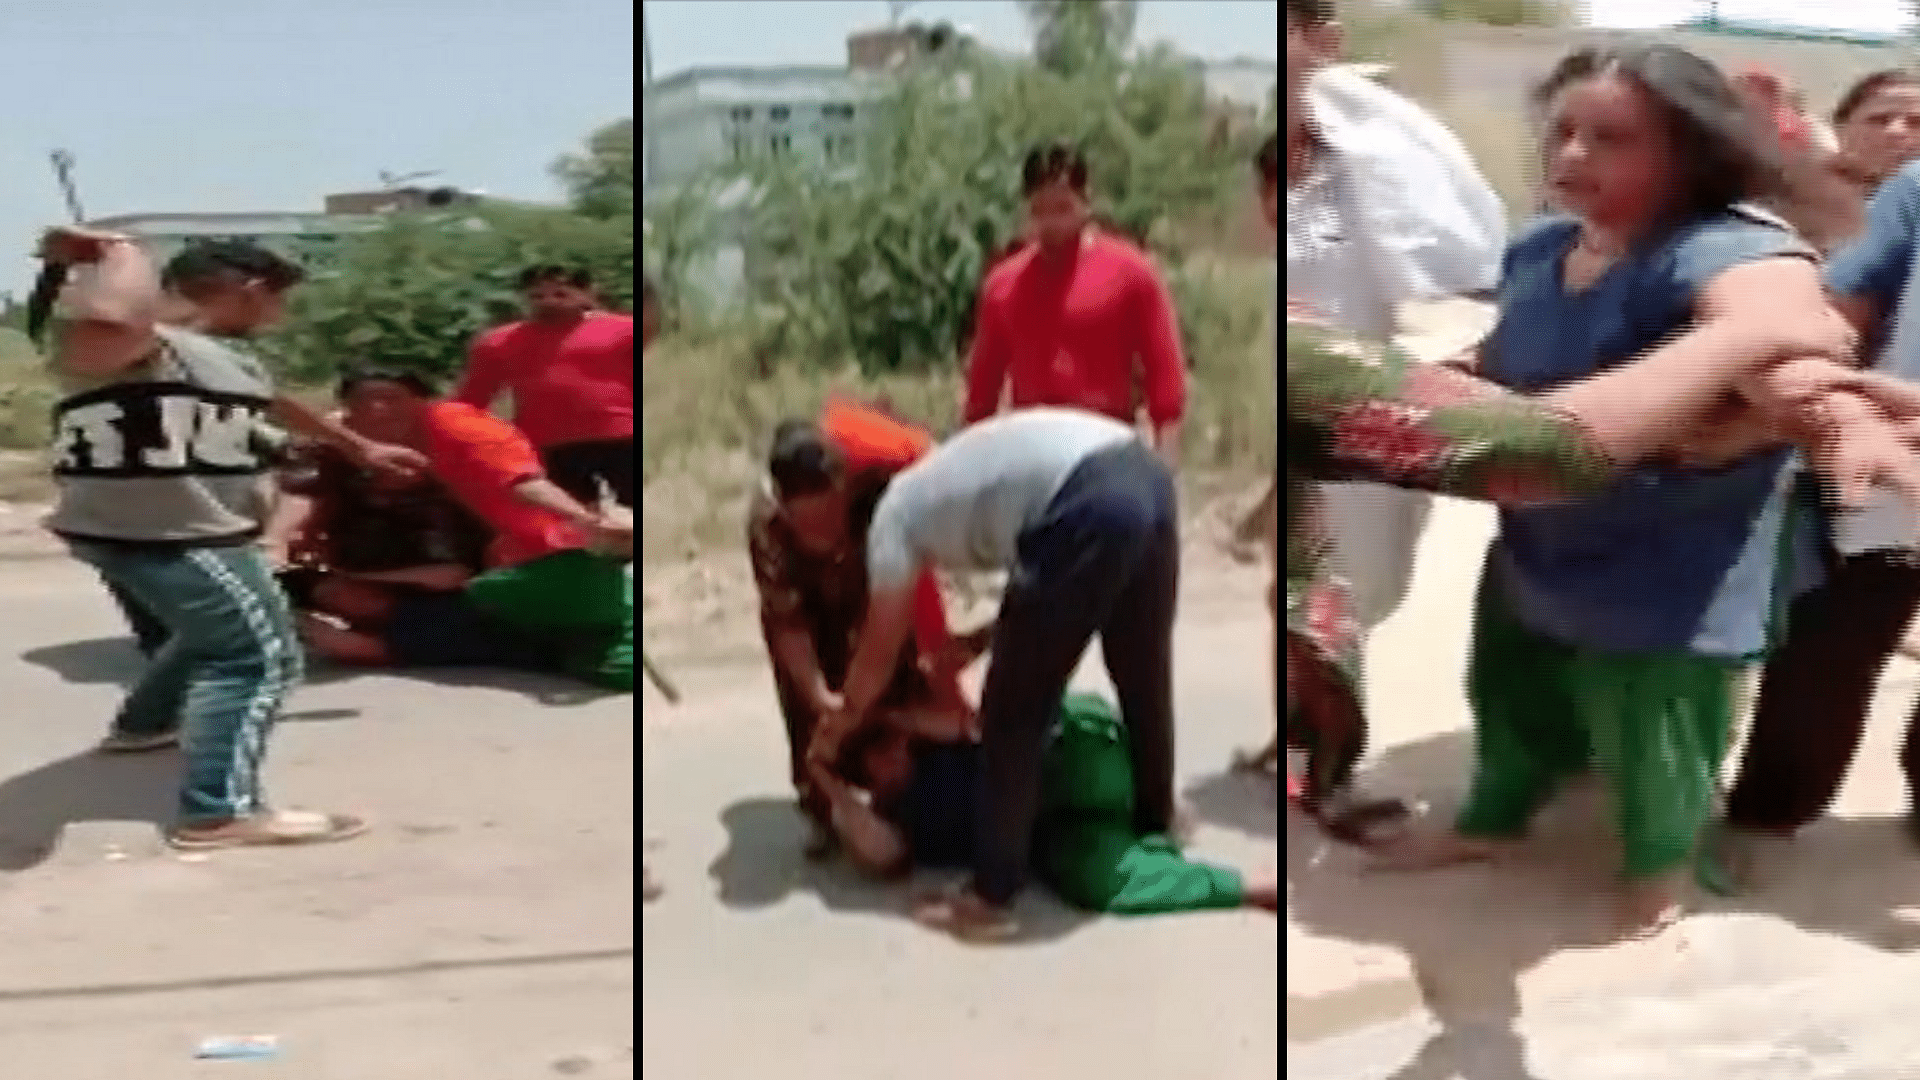 The incident came to light after a video of the men thrashing and kicking the woman with belts and sticks went viral.